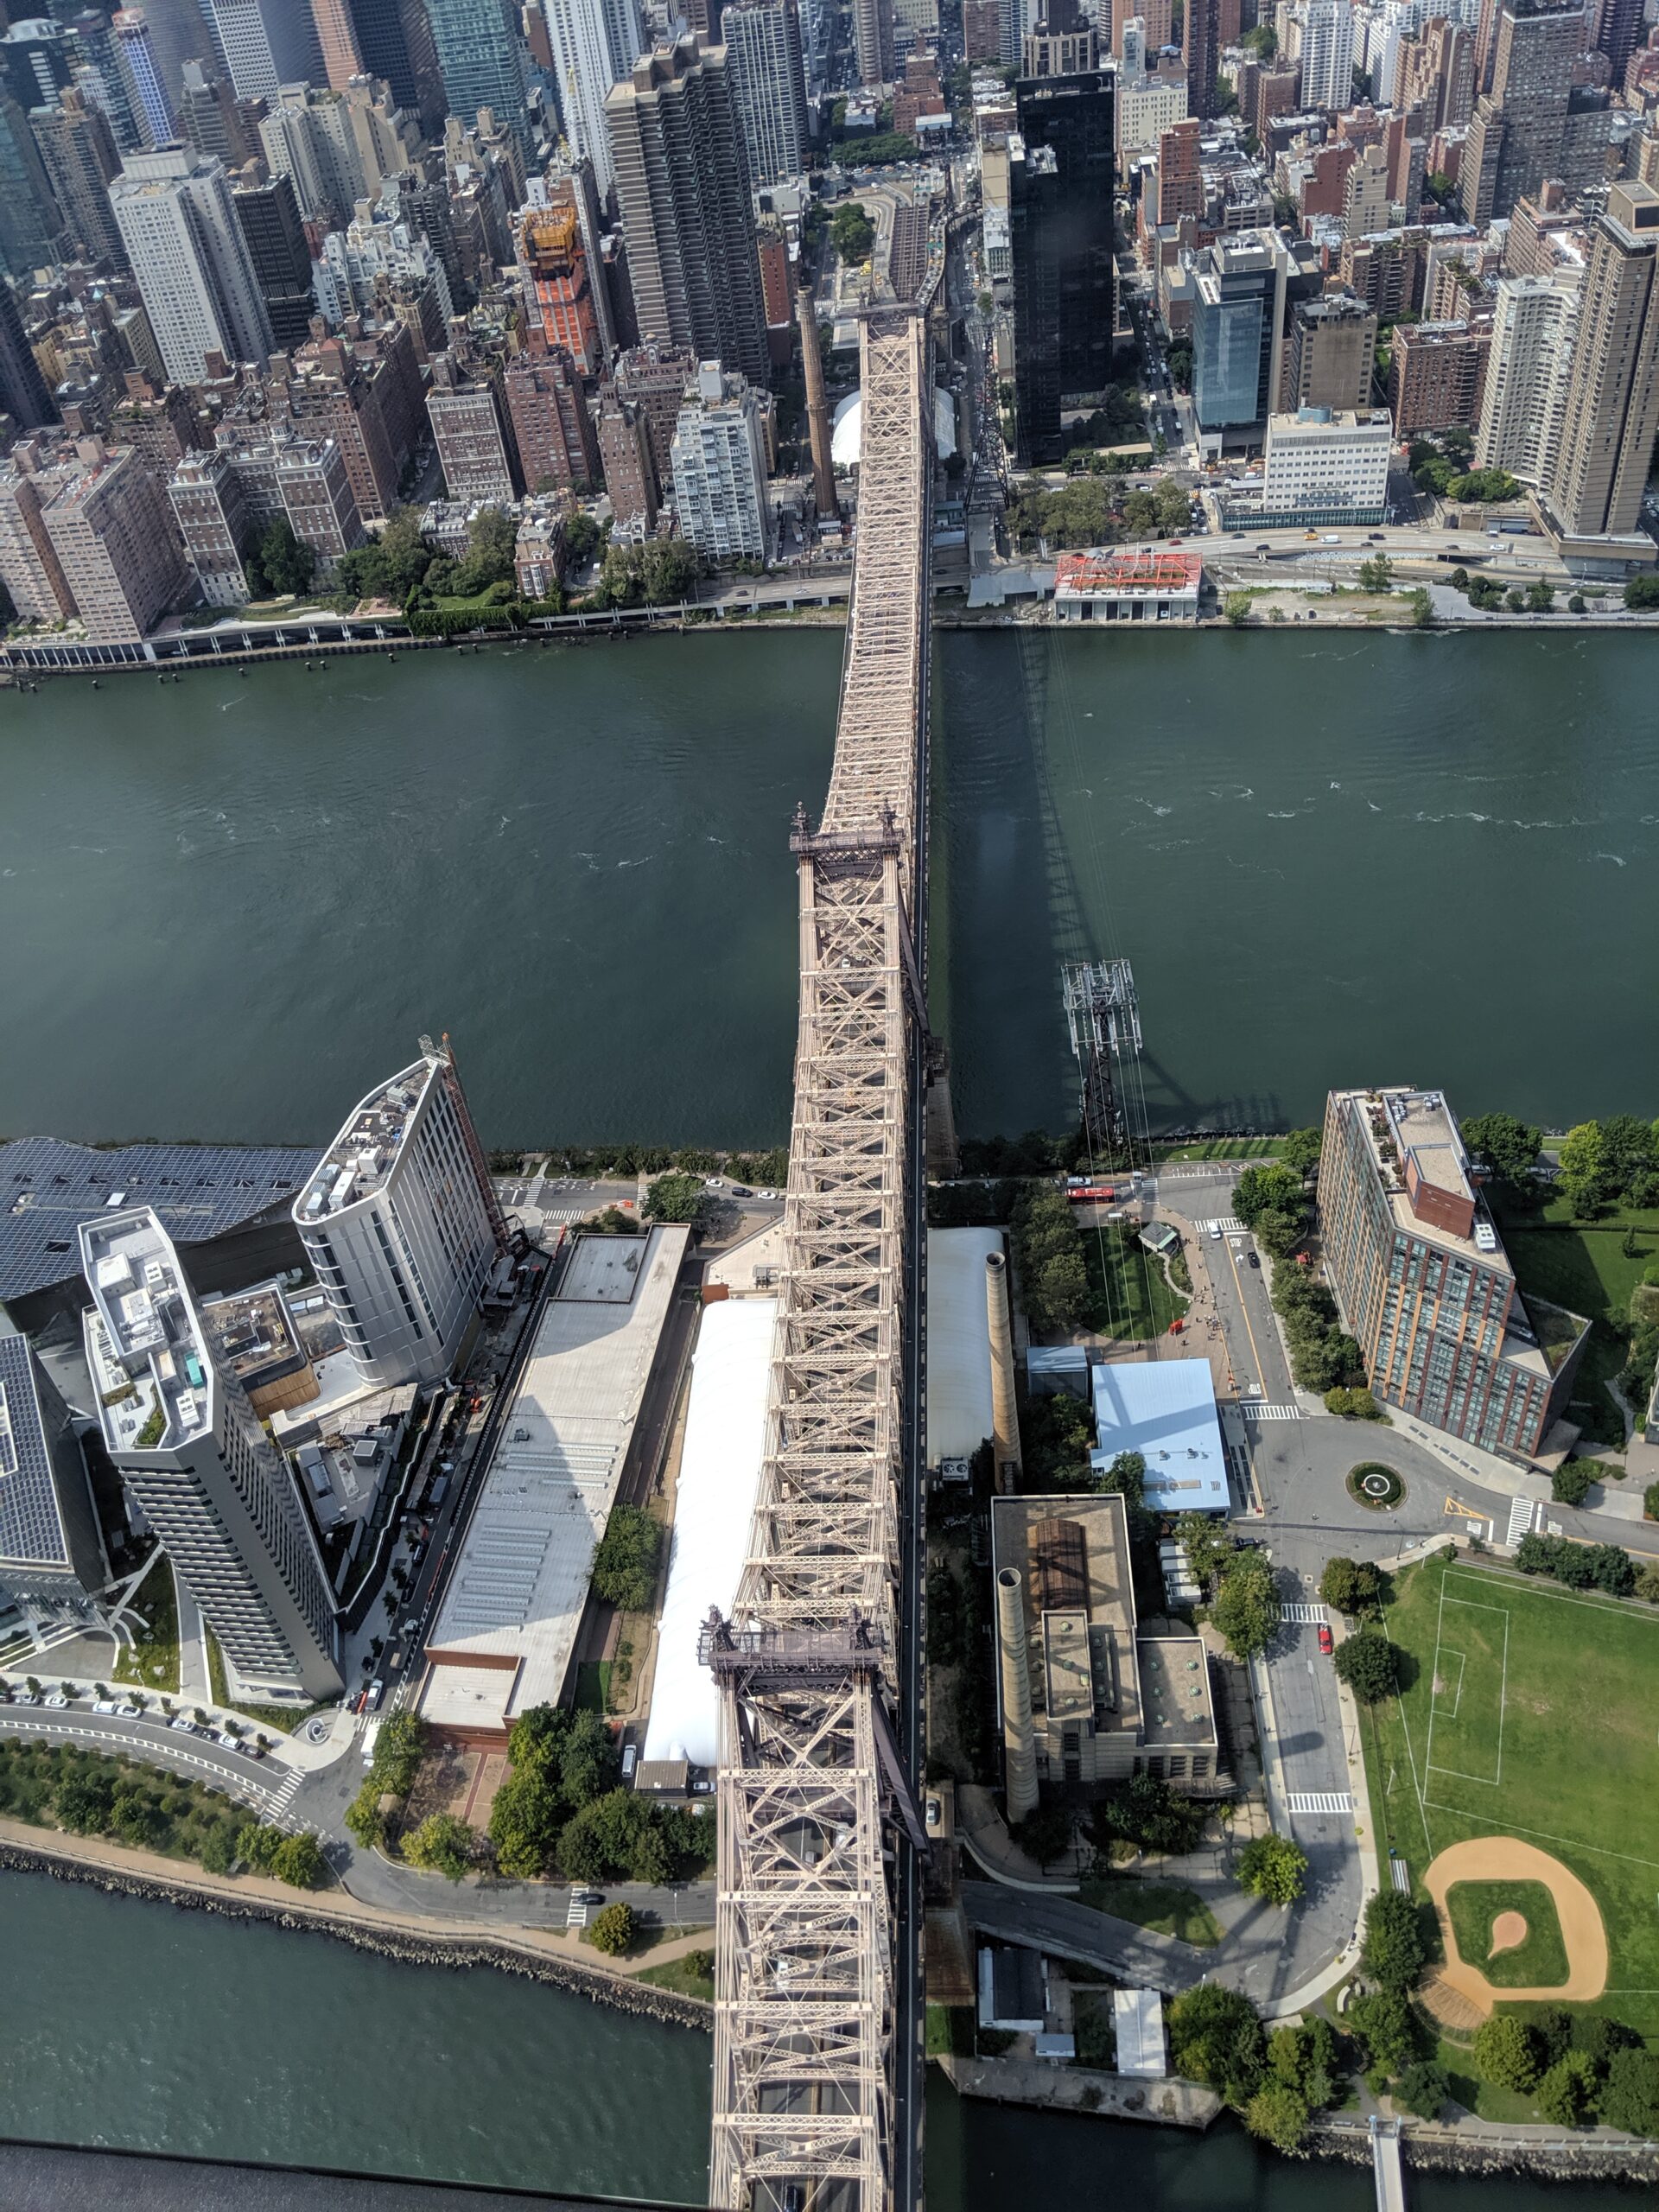 the view of queensboro bridge, roosevelt island and part of midtown Manhattan from the helicopter